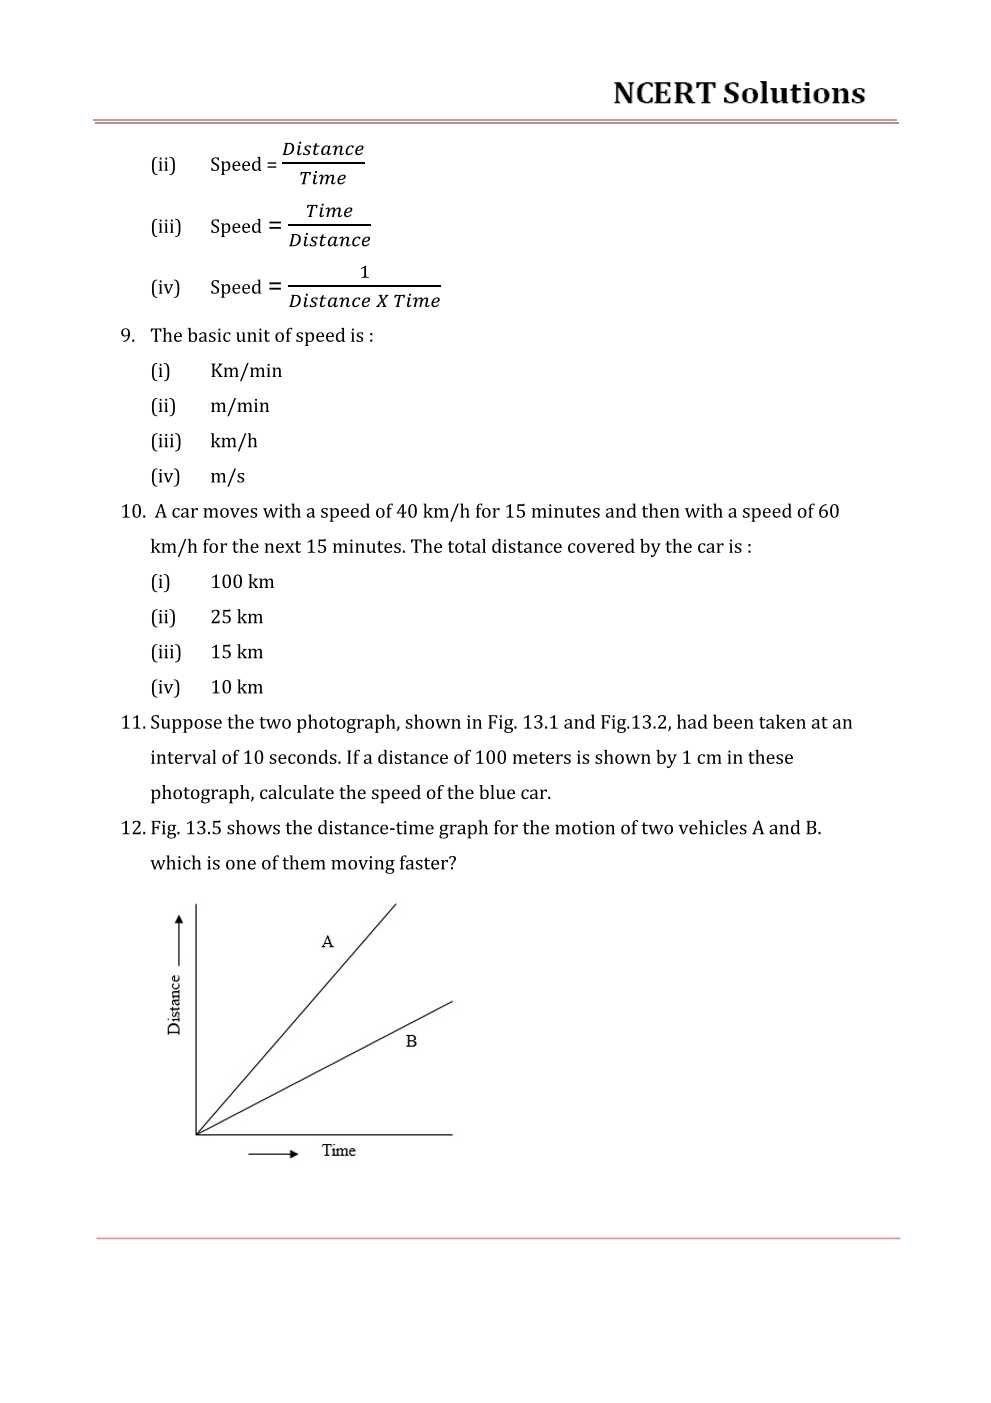 NCERT Solutions For Class 7 science Chapter 13 Motion and Time